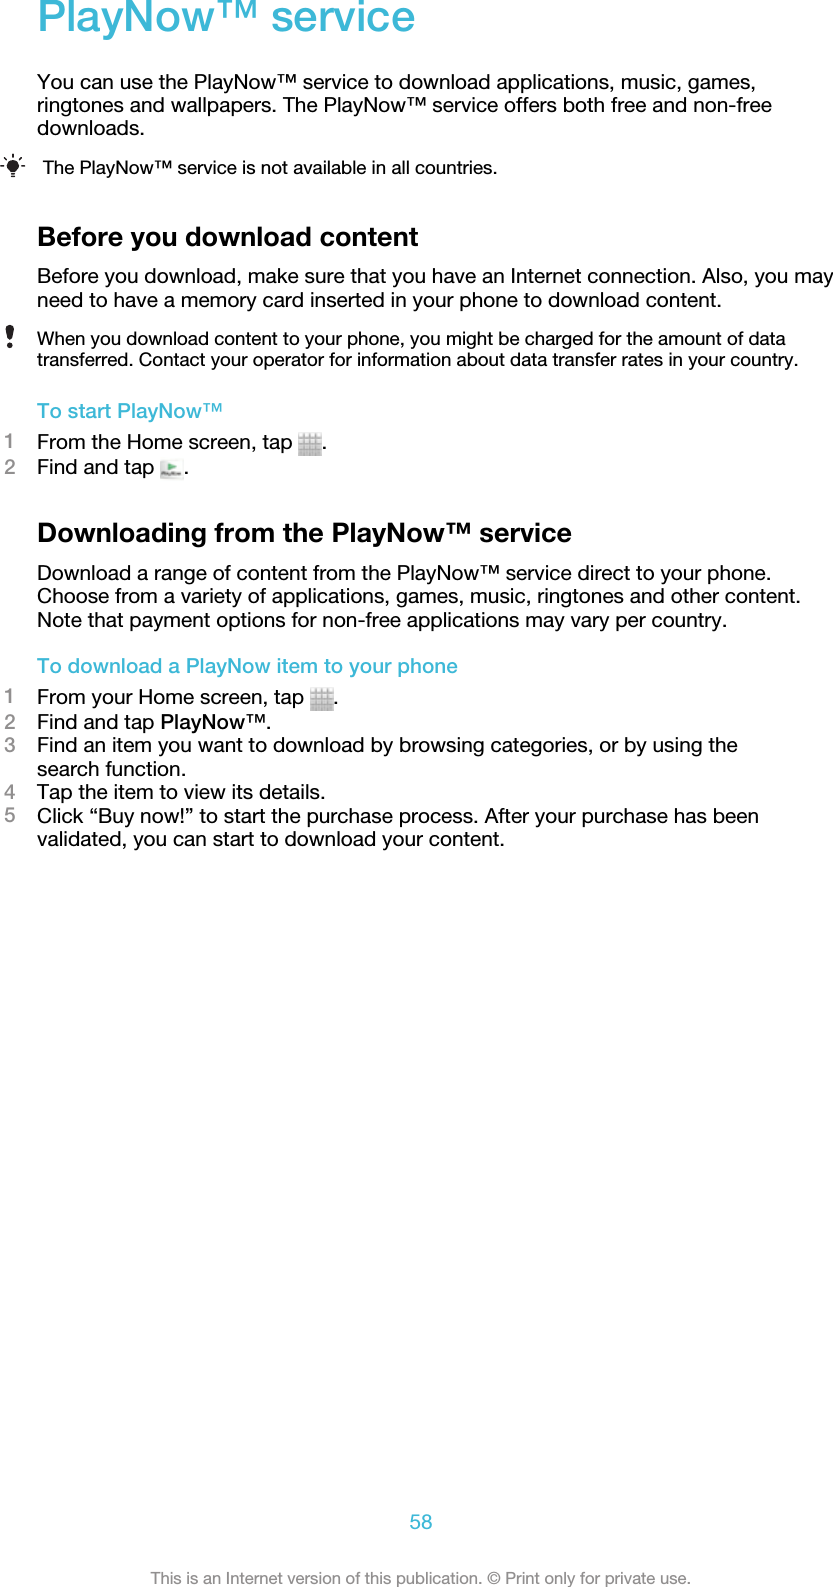 PlayNow™ serviceYou can use the PlayNow™ service to download applications, music, games,ringtones and wallpapers. The PlayNow™ service offers both free and non-freedownloads.The PlayNow™ service is not available in all countries.Before you download contentBefore you download, make sure that you have an Internet connection. Also, you mayneed to have a memory card inserted in your phone to download content.When you download content to your phone, you might be charged for the amount of datatransferred. Contact your operator for information about data transfer rates in your country.To start PlayNow™1From the Home screen, tap  .2Find and tap  .Downloading from the PlayNow™ serviceDownload a range of content from the PlayNow™ service direct to your phone.Choose from a variety of applications, games, music, ringtones and other content.Note that payment options for non-free applications may vary per country.To download a PlayNow item to your phone1From your Home screen, tap  .2Find and tap PlayNow™.3Find an item you want to download by browsing categories, or by using thesearch function.4Tap the item to view its details.5Click “Buy now!” to start the purchase process. After your purchase has beenvalidated, you can start to download your content.58This is an Internet version of this publication. © Print only for private use.